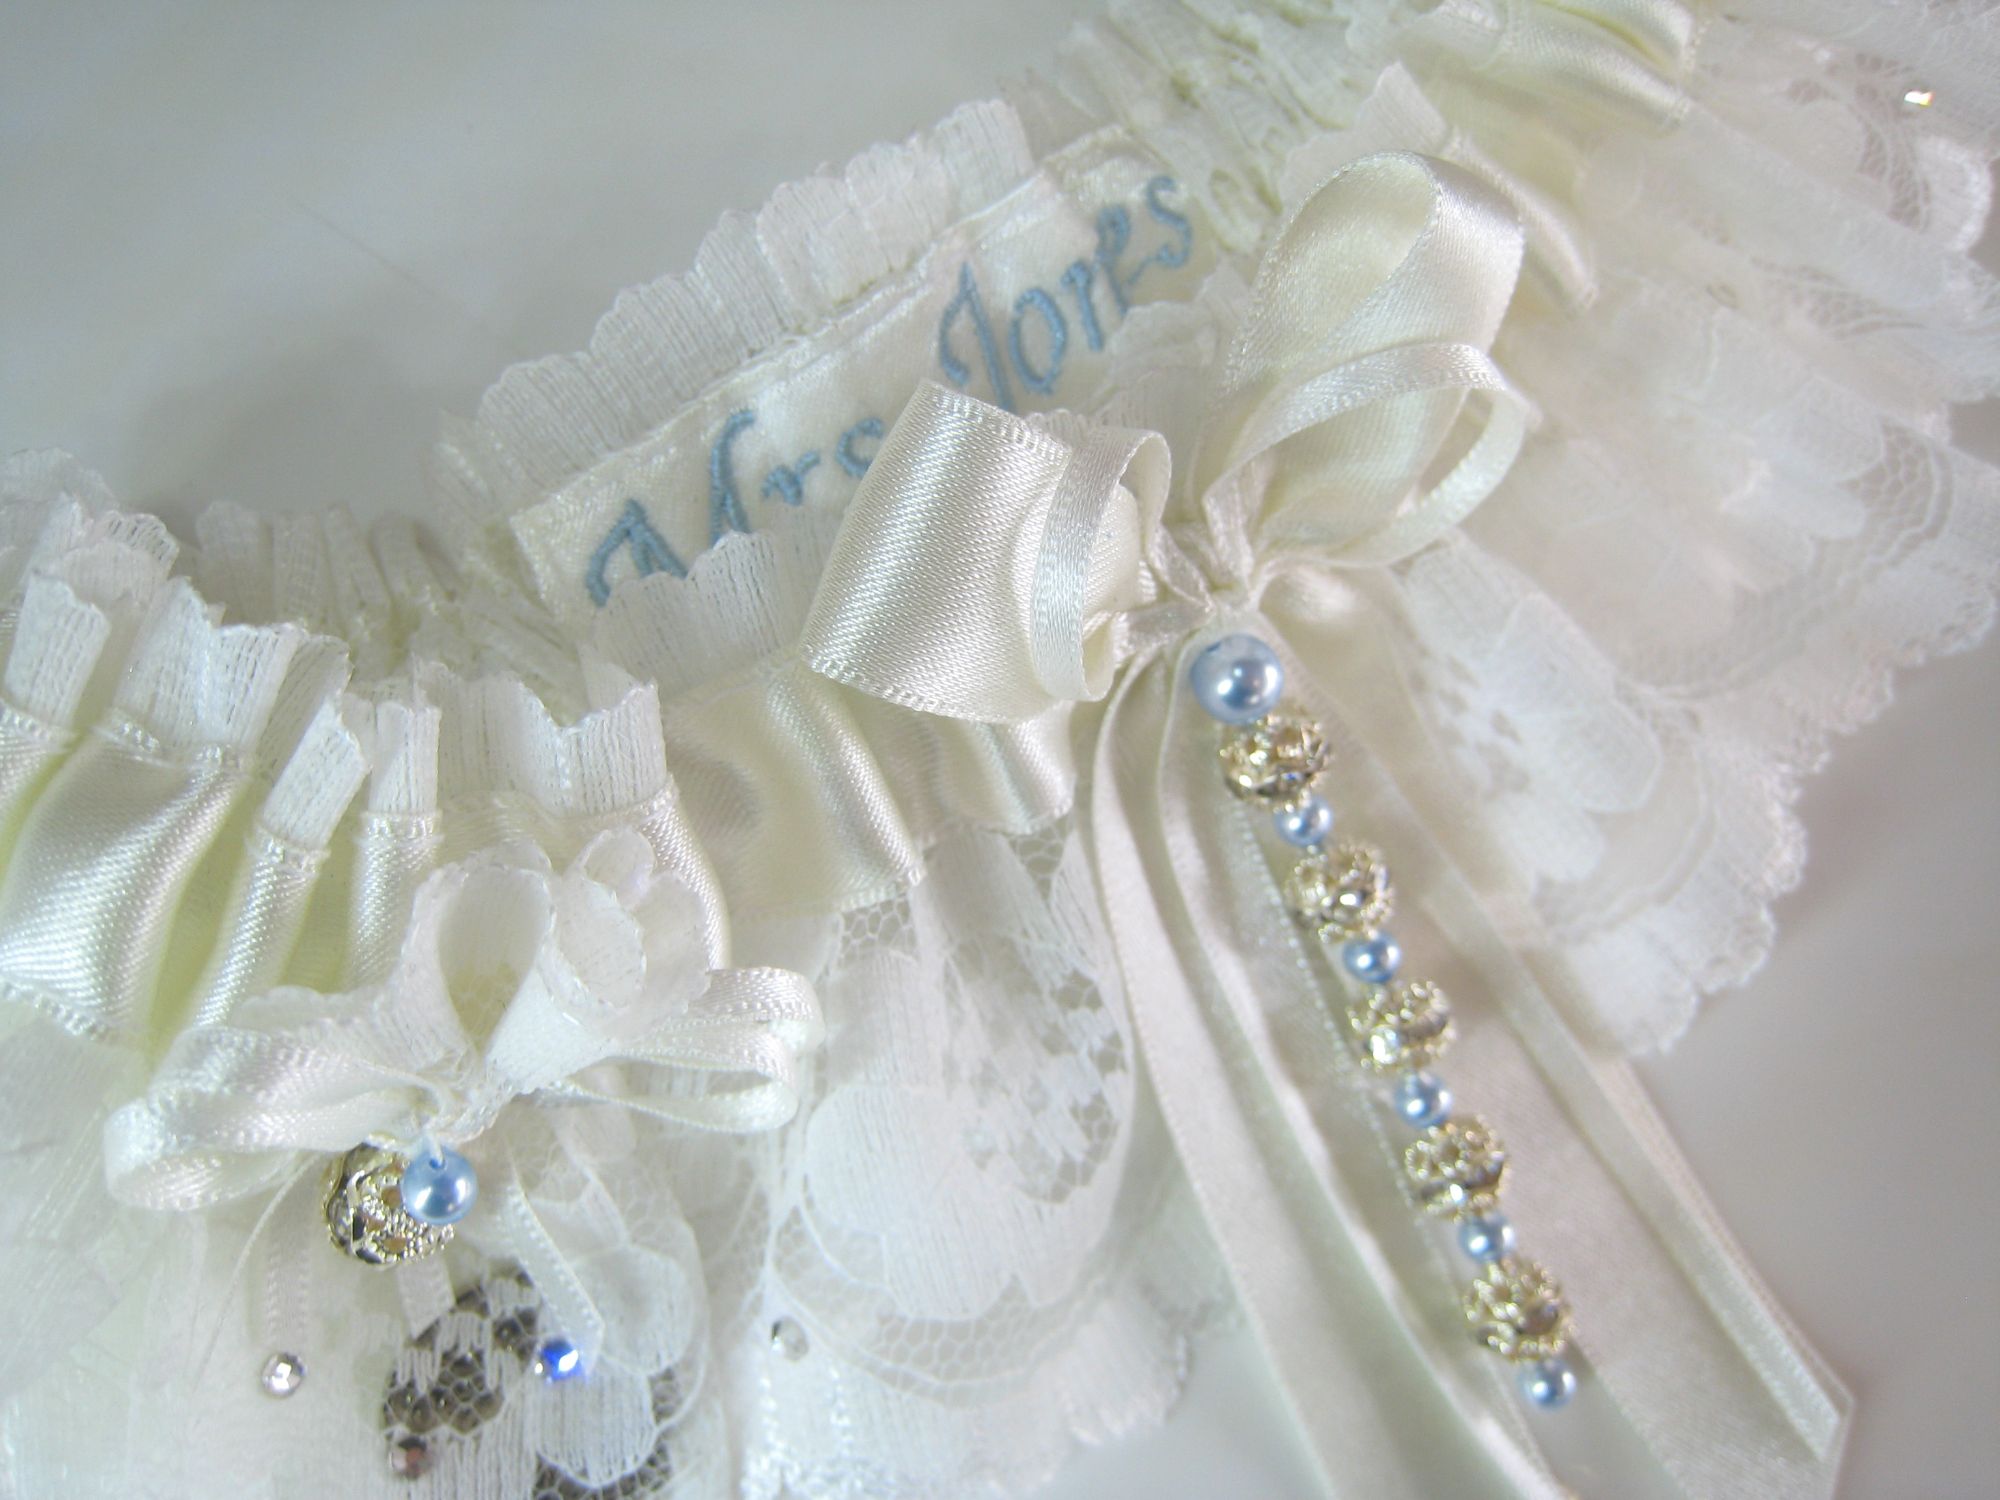 Luxury Garter, Swarovski Crystals, Silver Sixpence & Personalised Too!